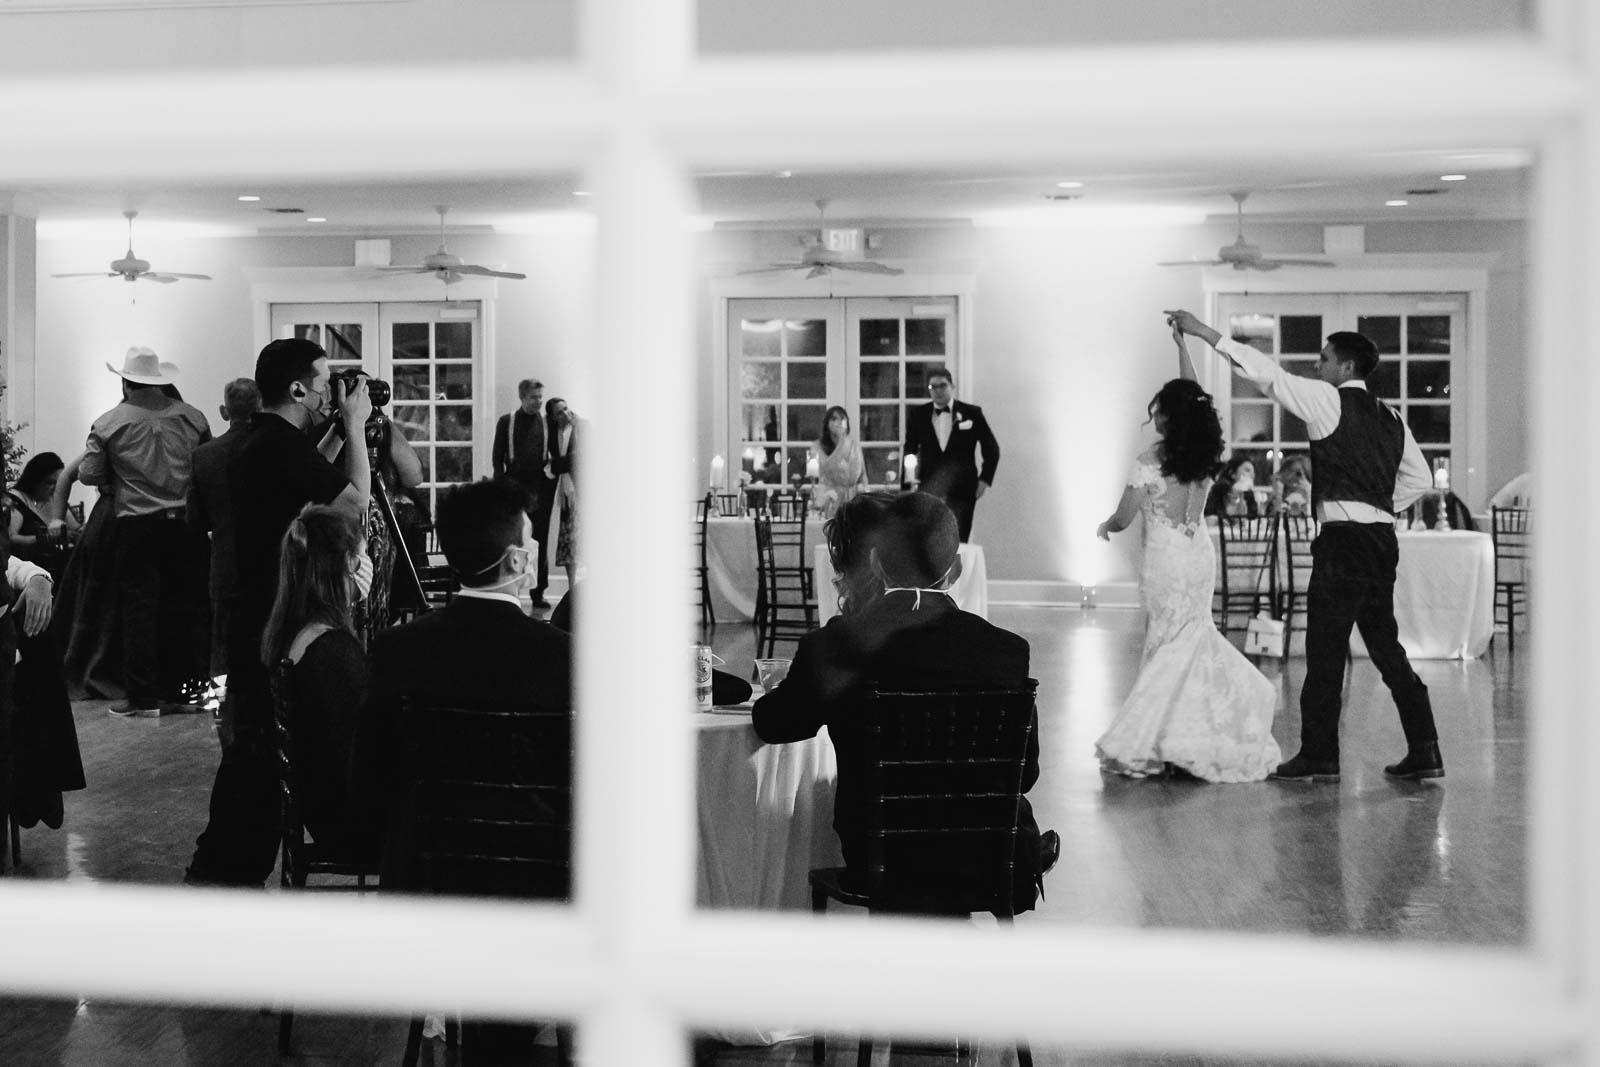 Photograph of the window at Kendall point the bride it world by the groom